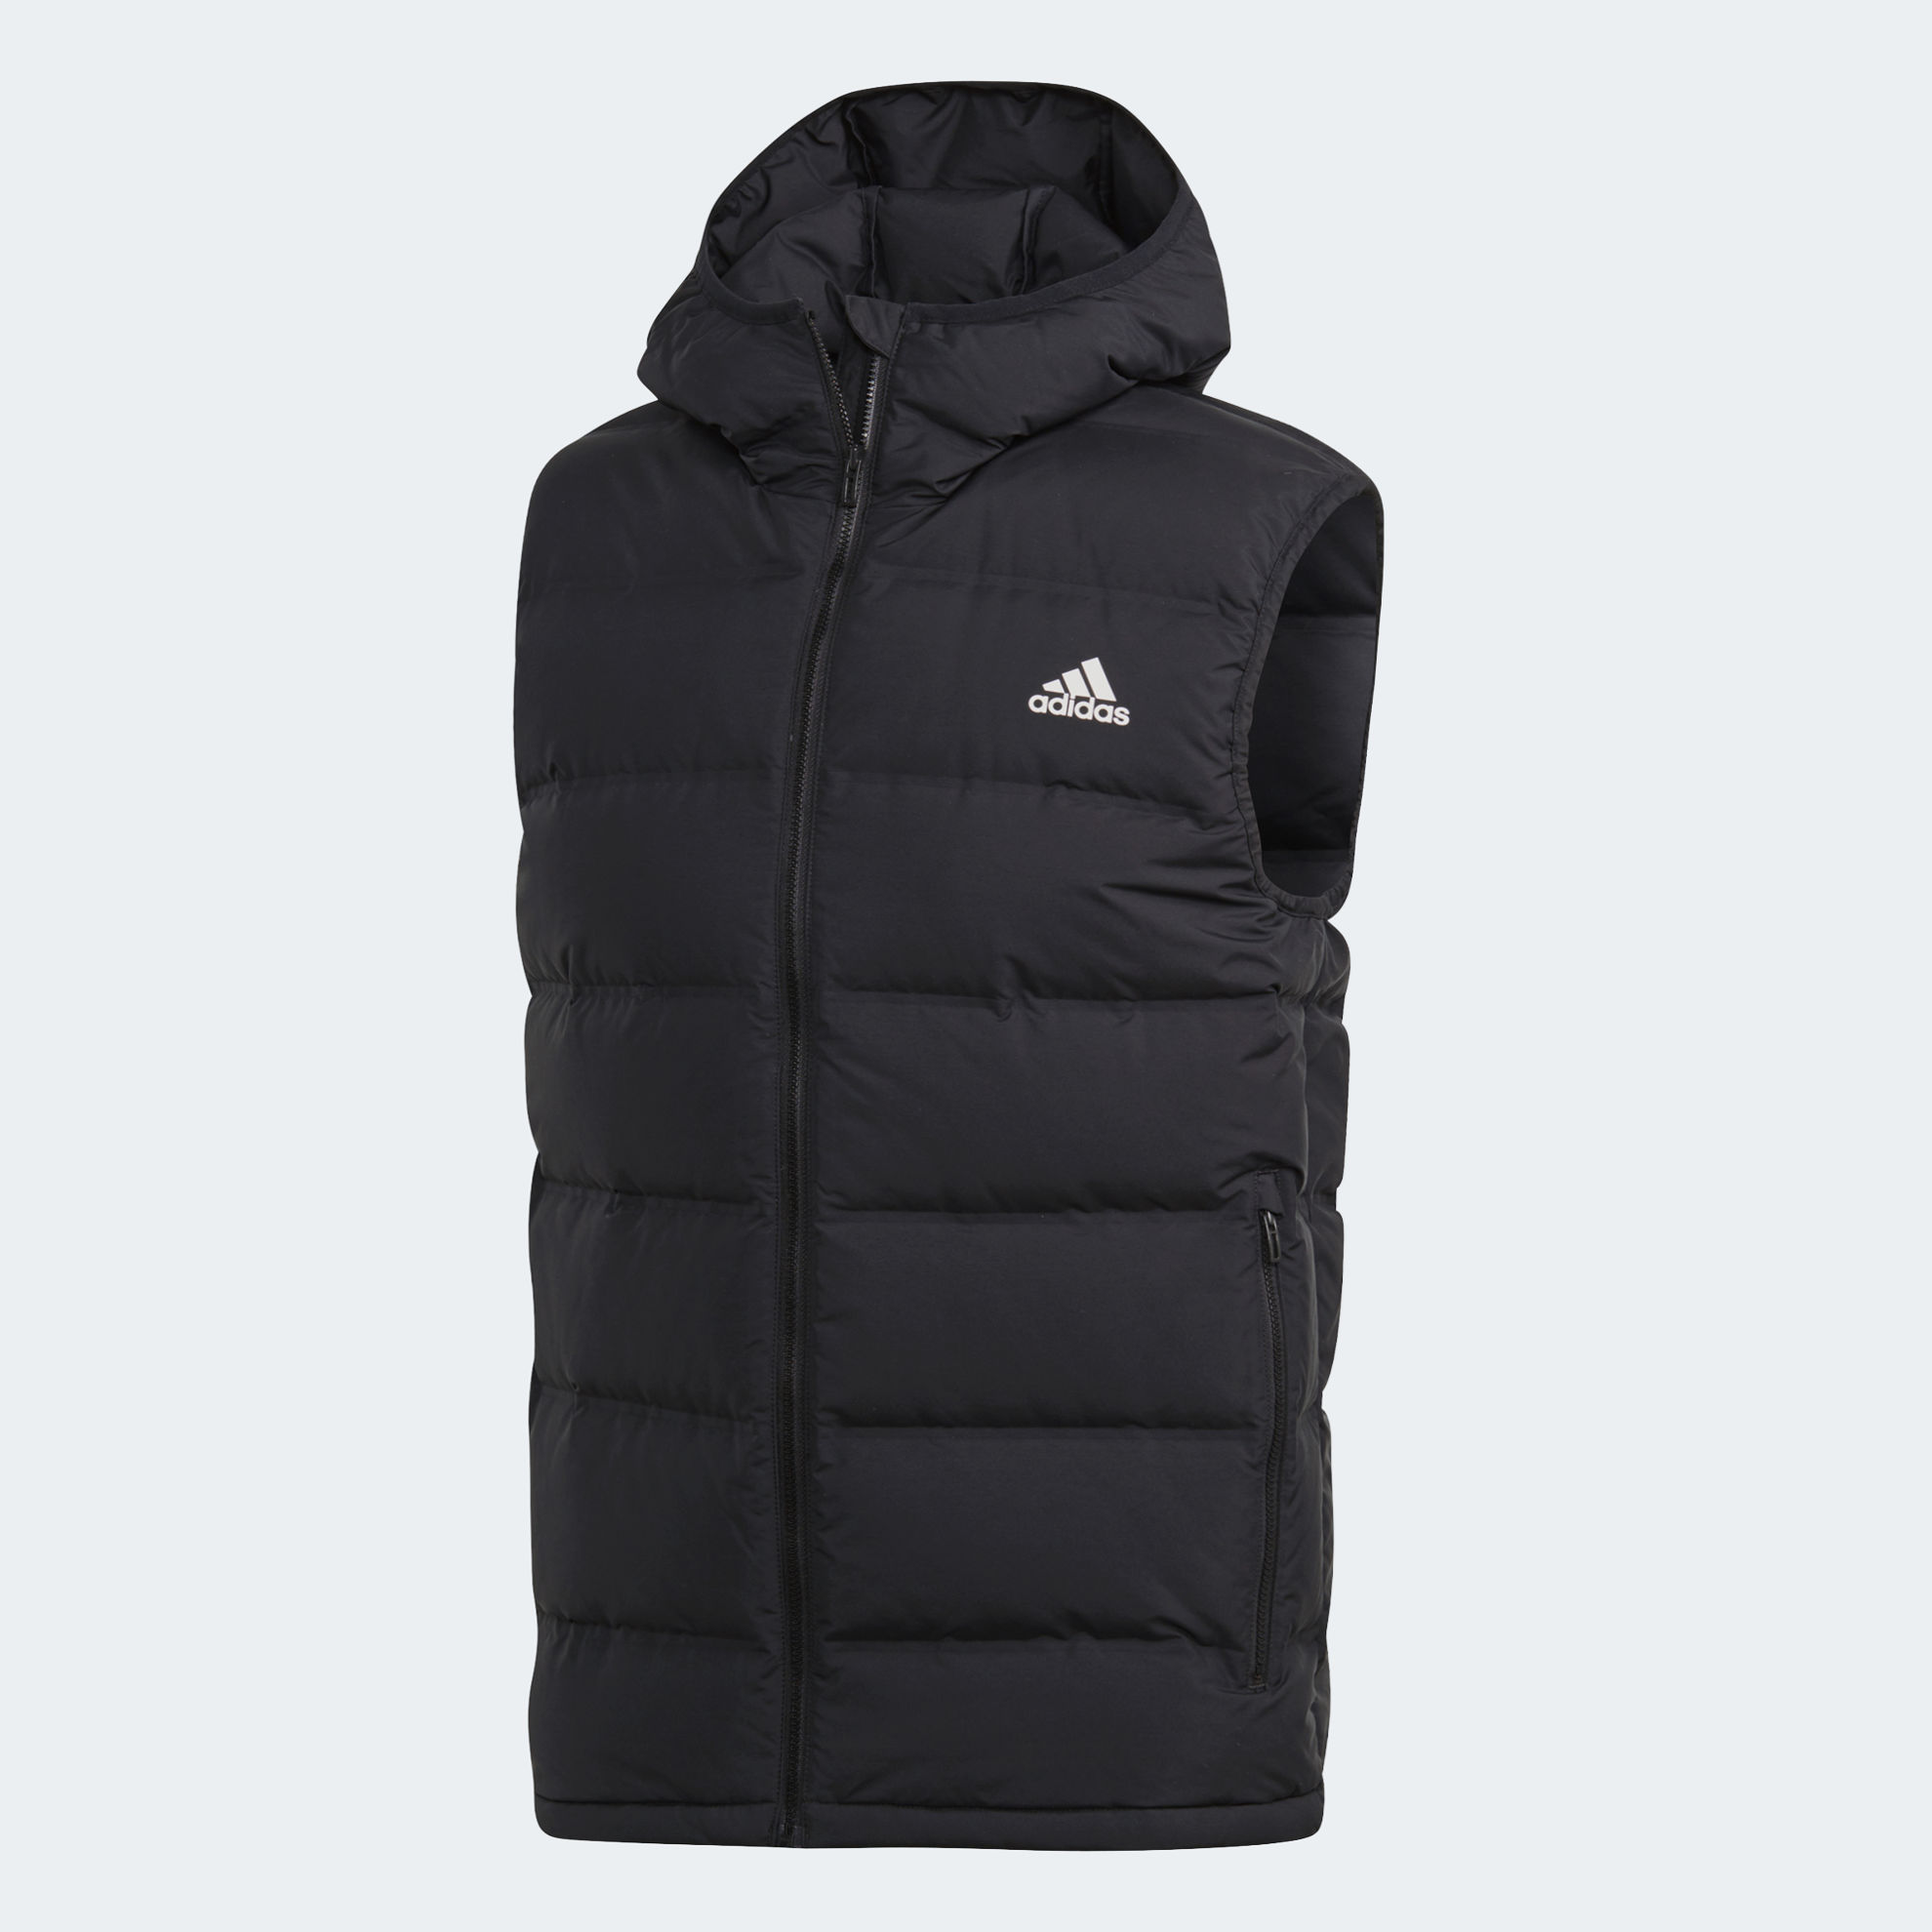 adidas Helionic Hooded Down Vest | adidas Egypt Official Website